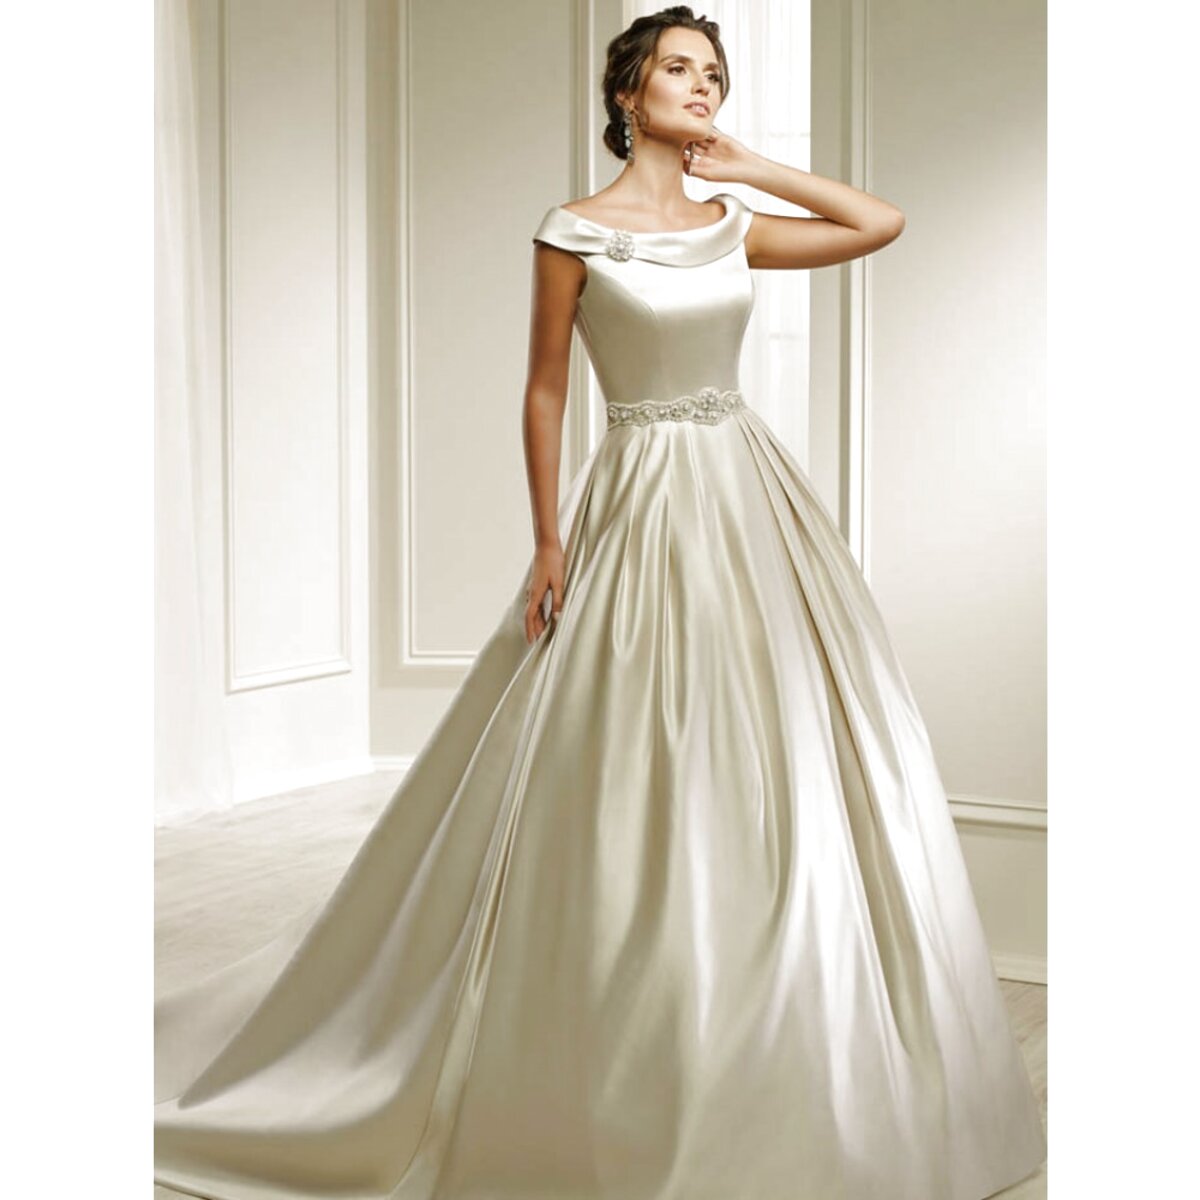 Oyster Wedding Dress for sale in UK View 39 bargains